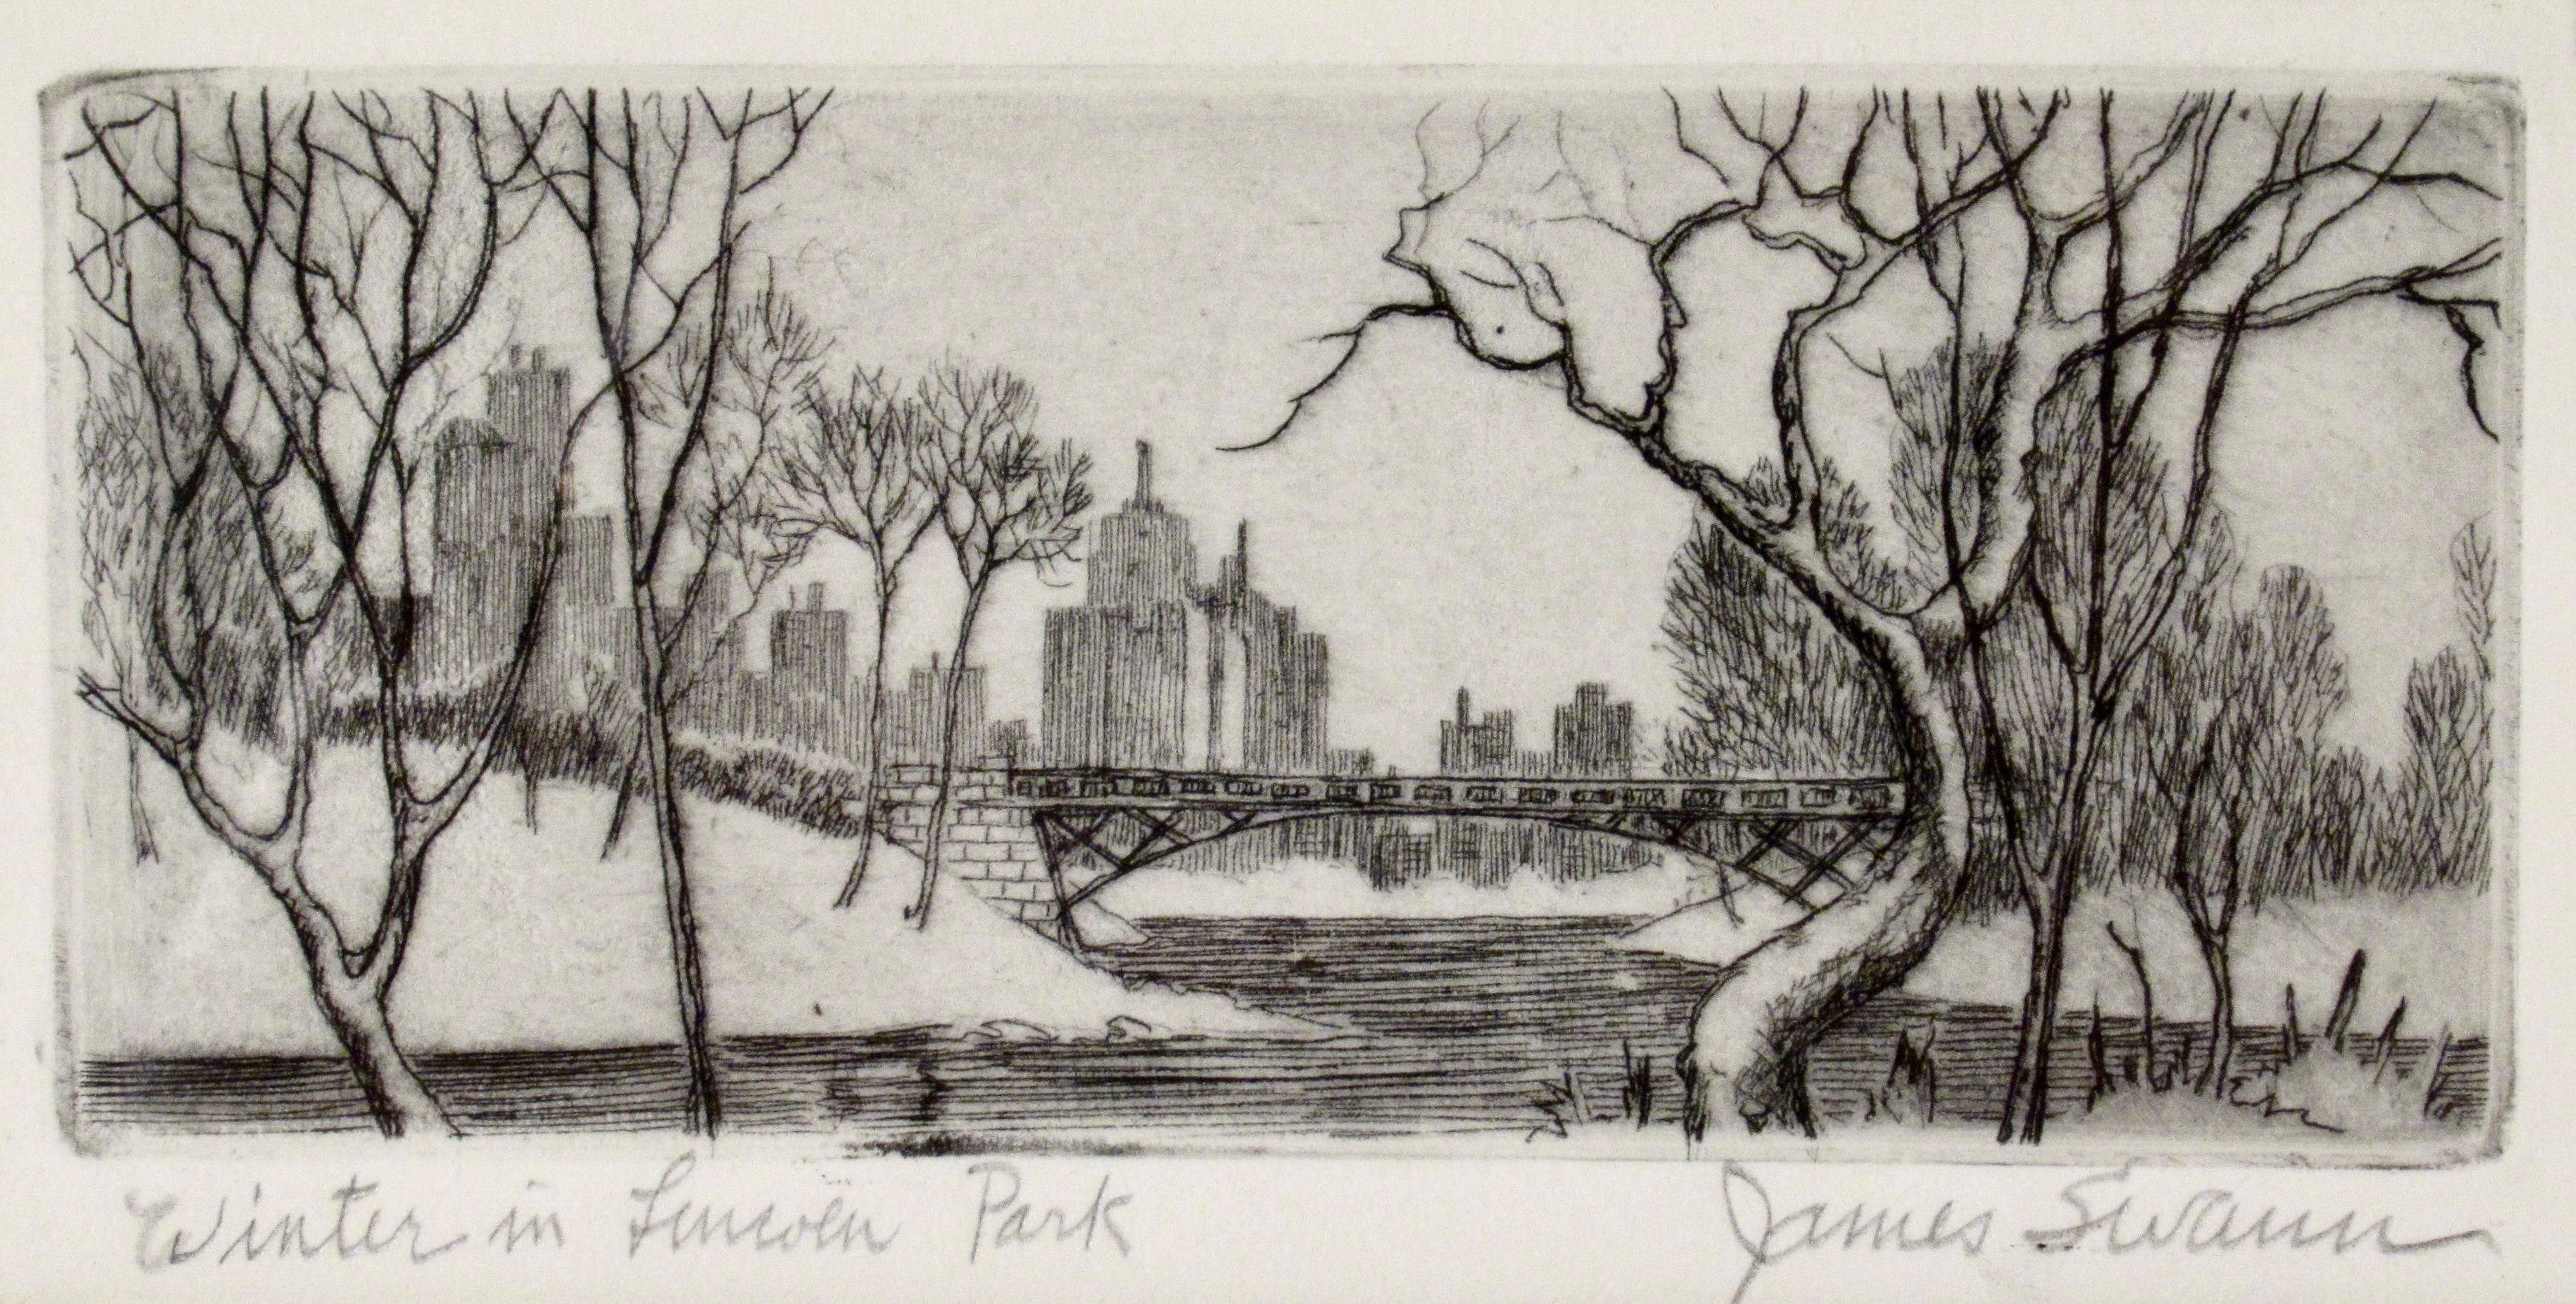 Winter in Lincoln Park (Chicago) - Print by James Swann